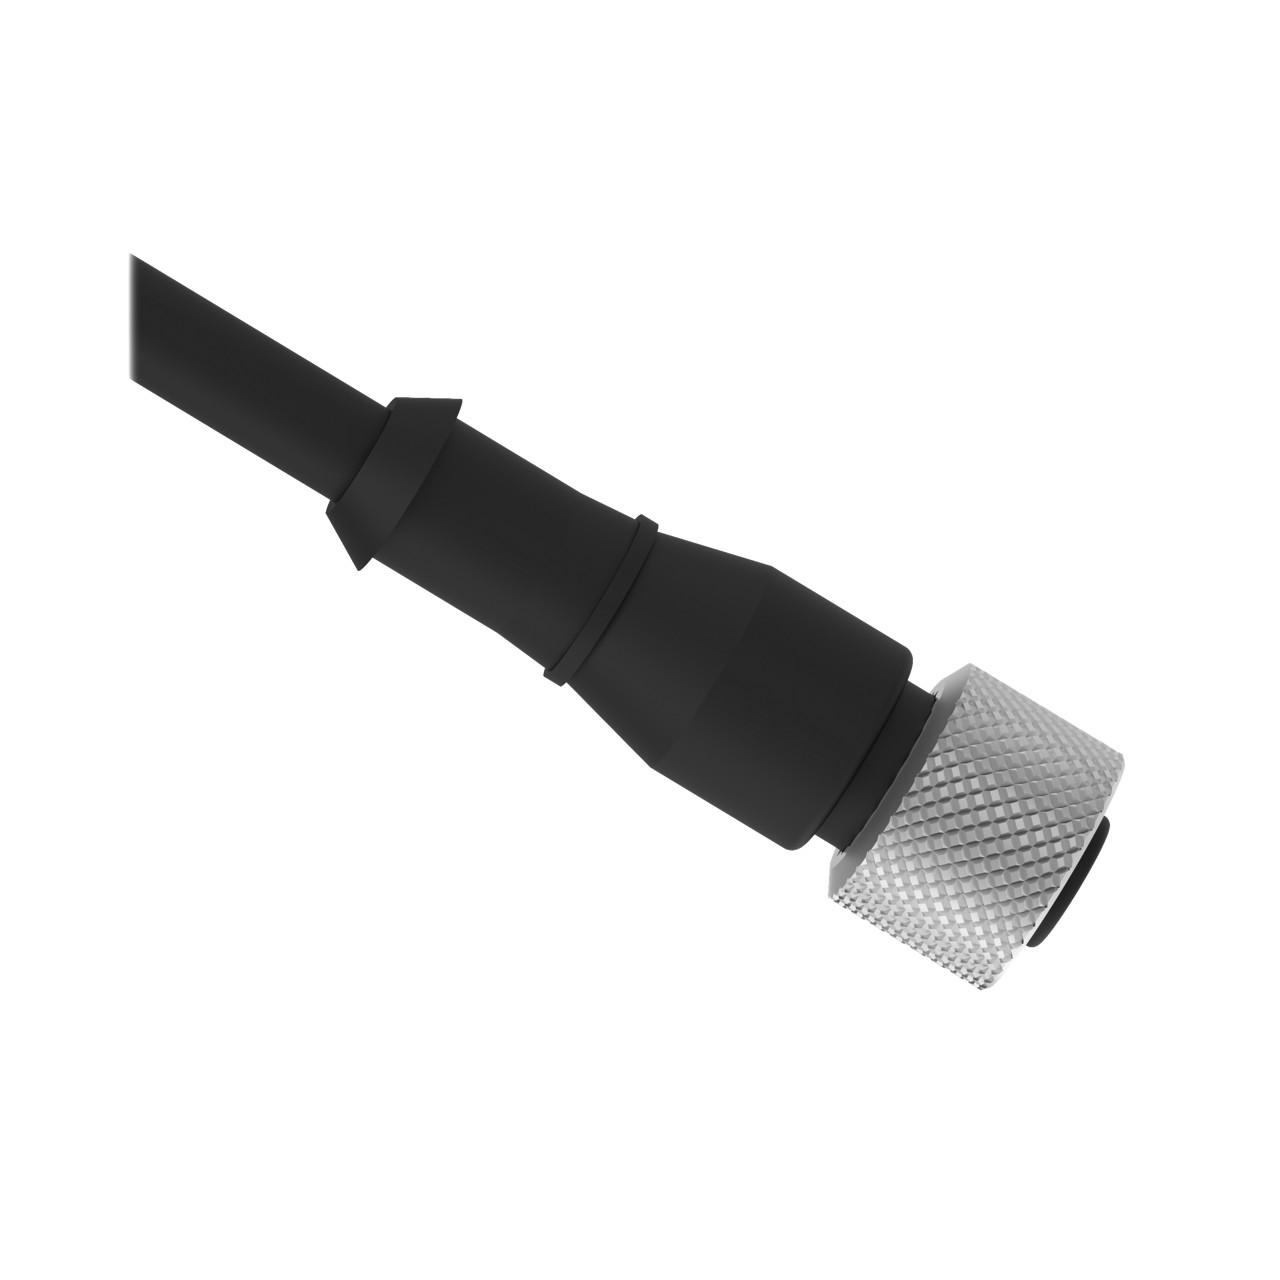 Banner MQDC1-506 Euro-style Quick Disconnect Cable, 5 Pin Straight Connector, 2 m (6.5 ft) in Length, Chrome plated brass coupling nut